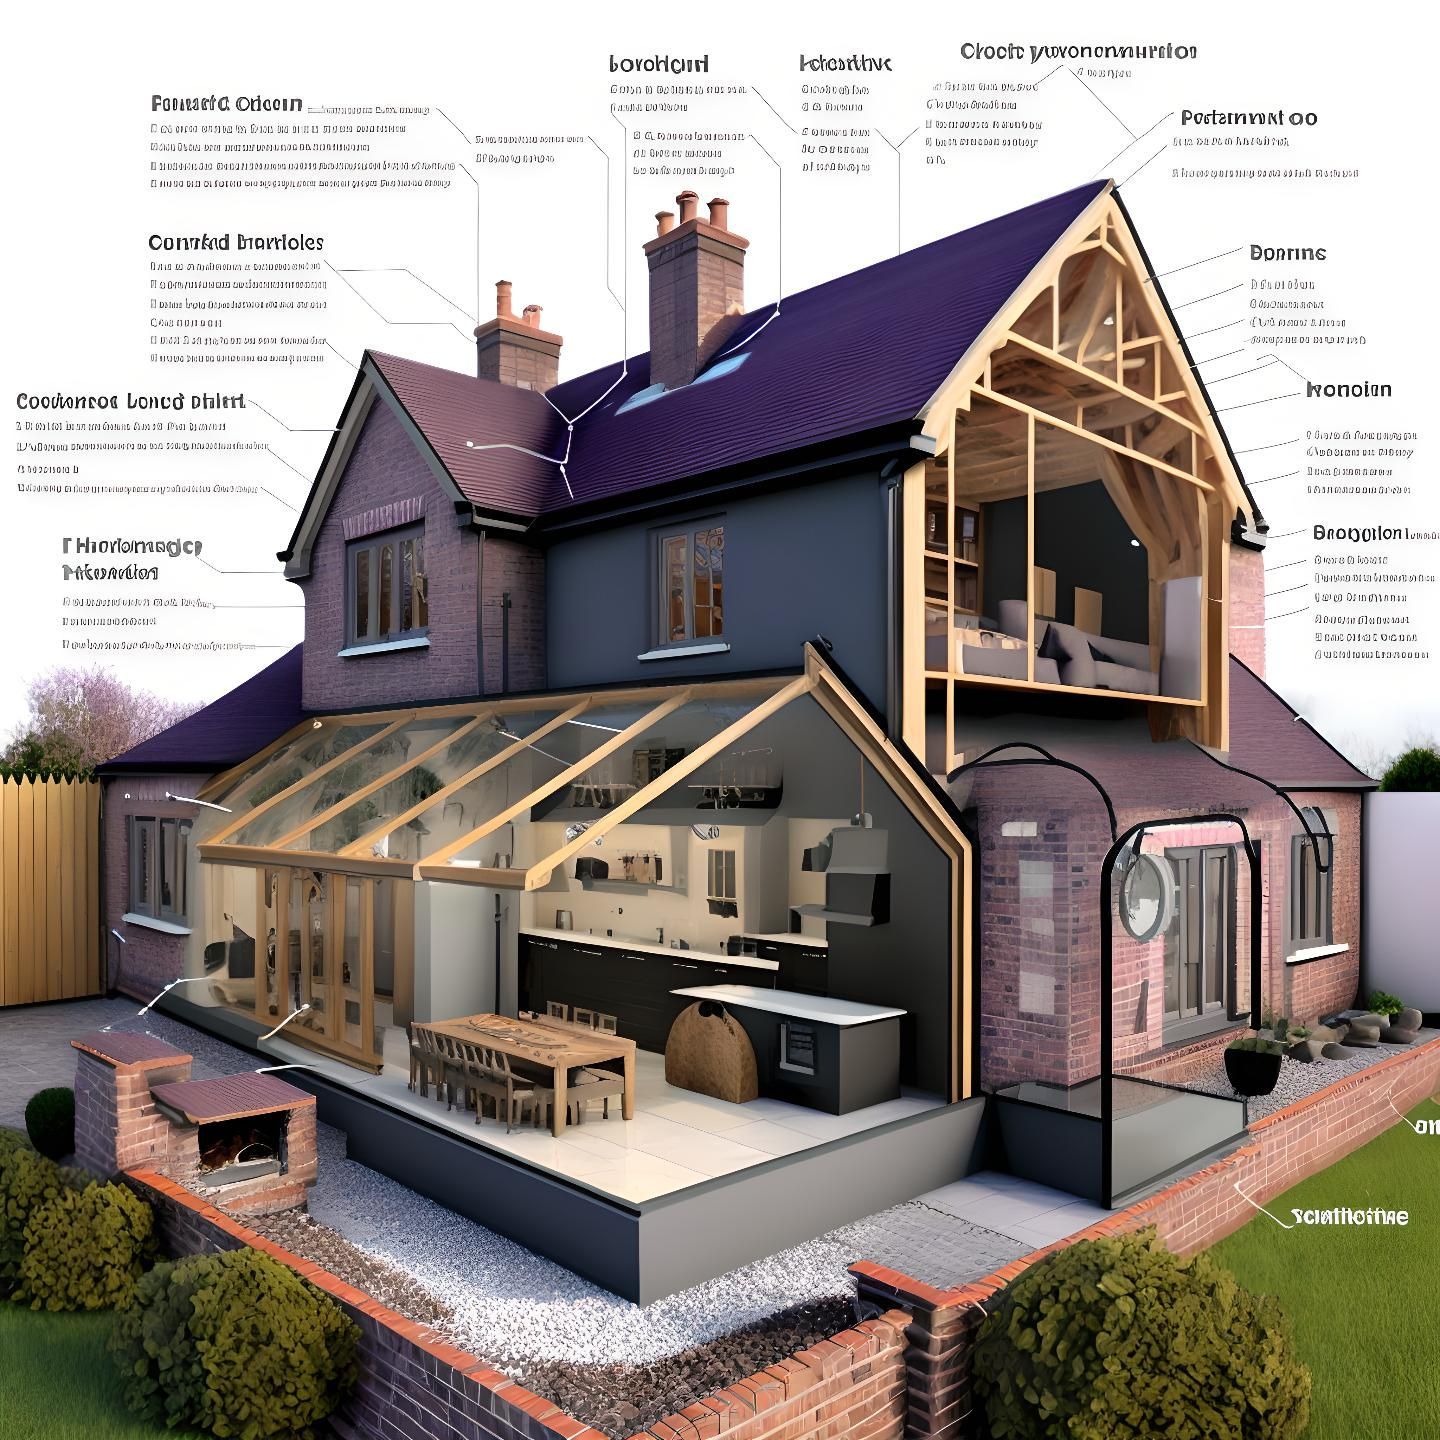 Diagram showing steps in choosing a contractor for loft conversion, including evaluation and payment